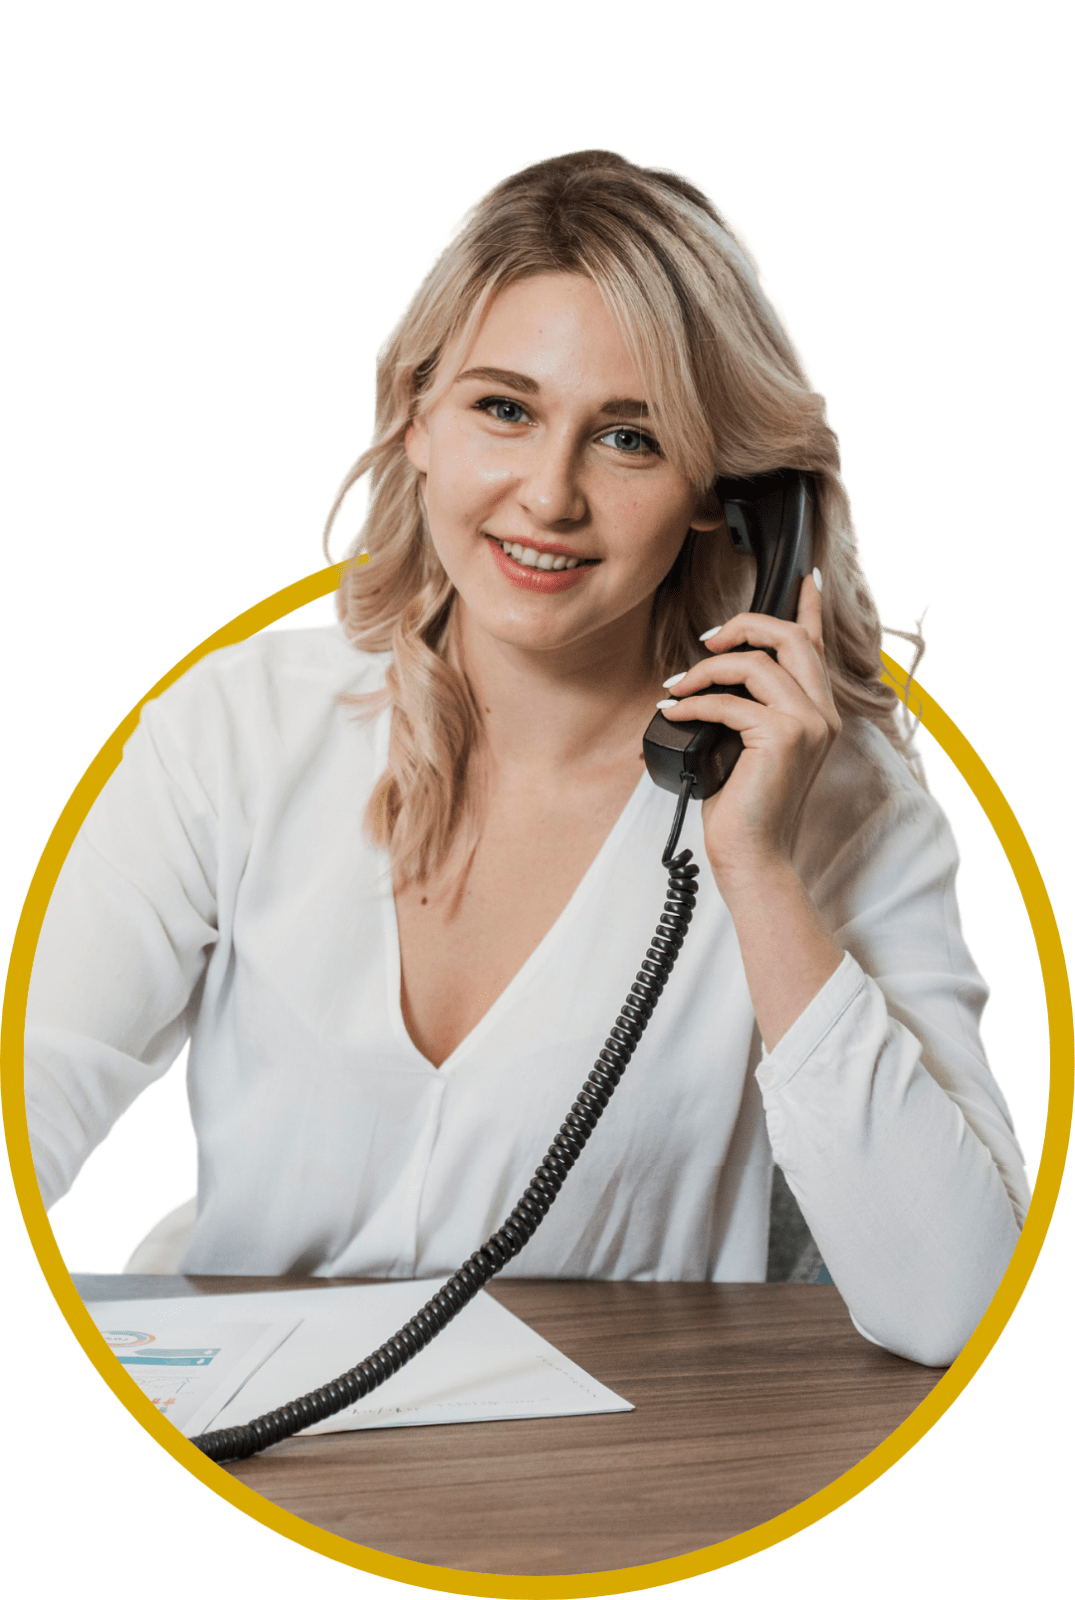 Guide to Switching to a Cloud-Based Phone System - Hero - Rhode Island Telephone - Young woman smiling while using a desk phone